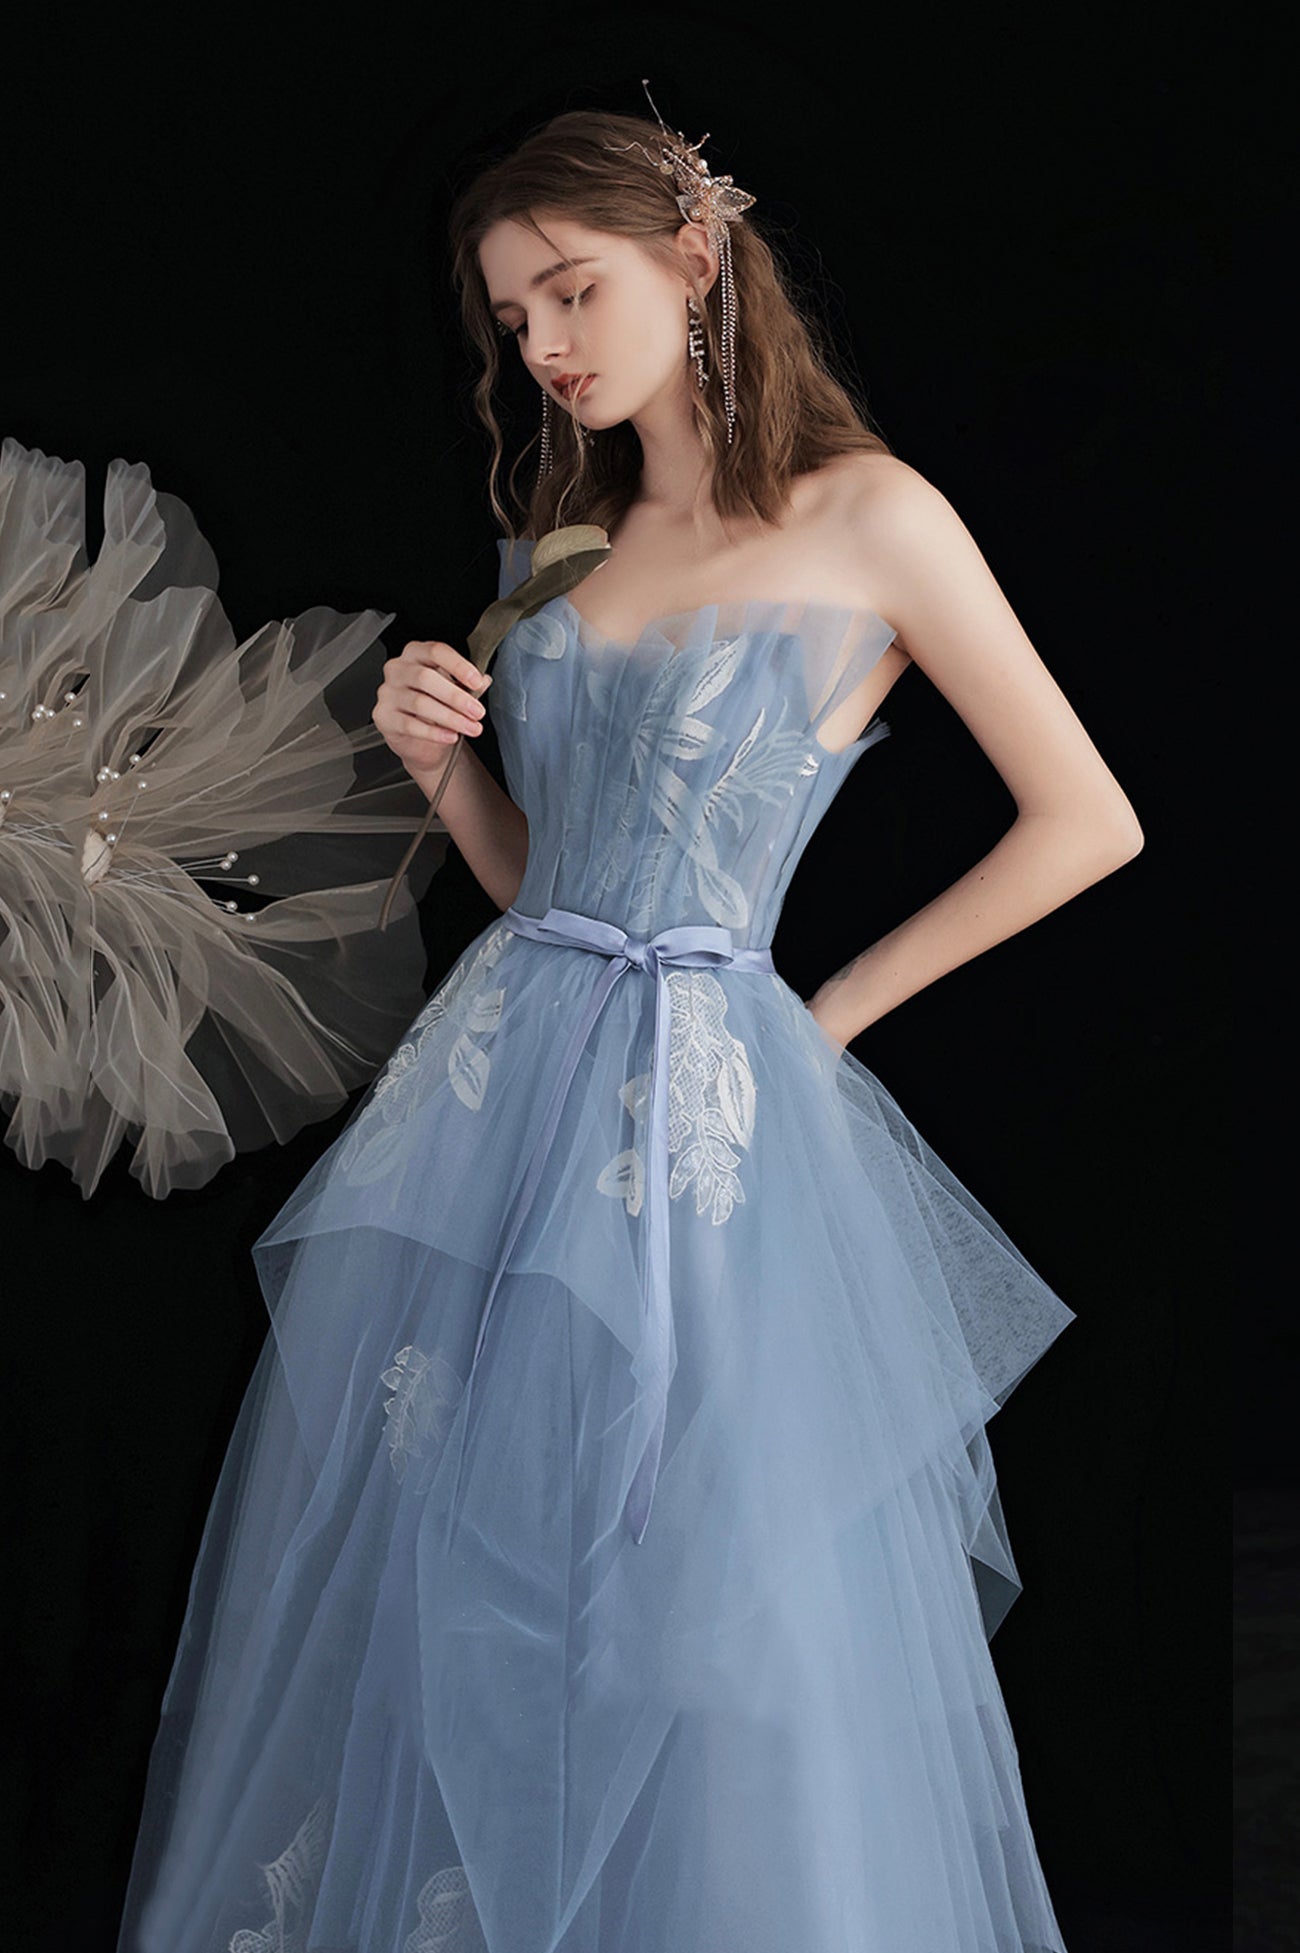 Blue Tulle Long A-Line Prom Dress with Lace, Cute Strapless Evening Party Dress